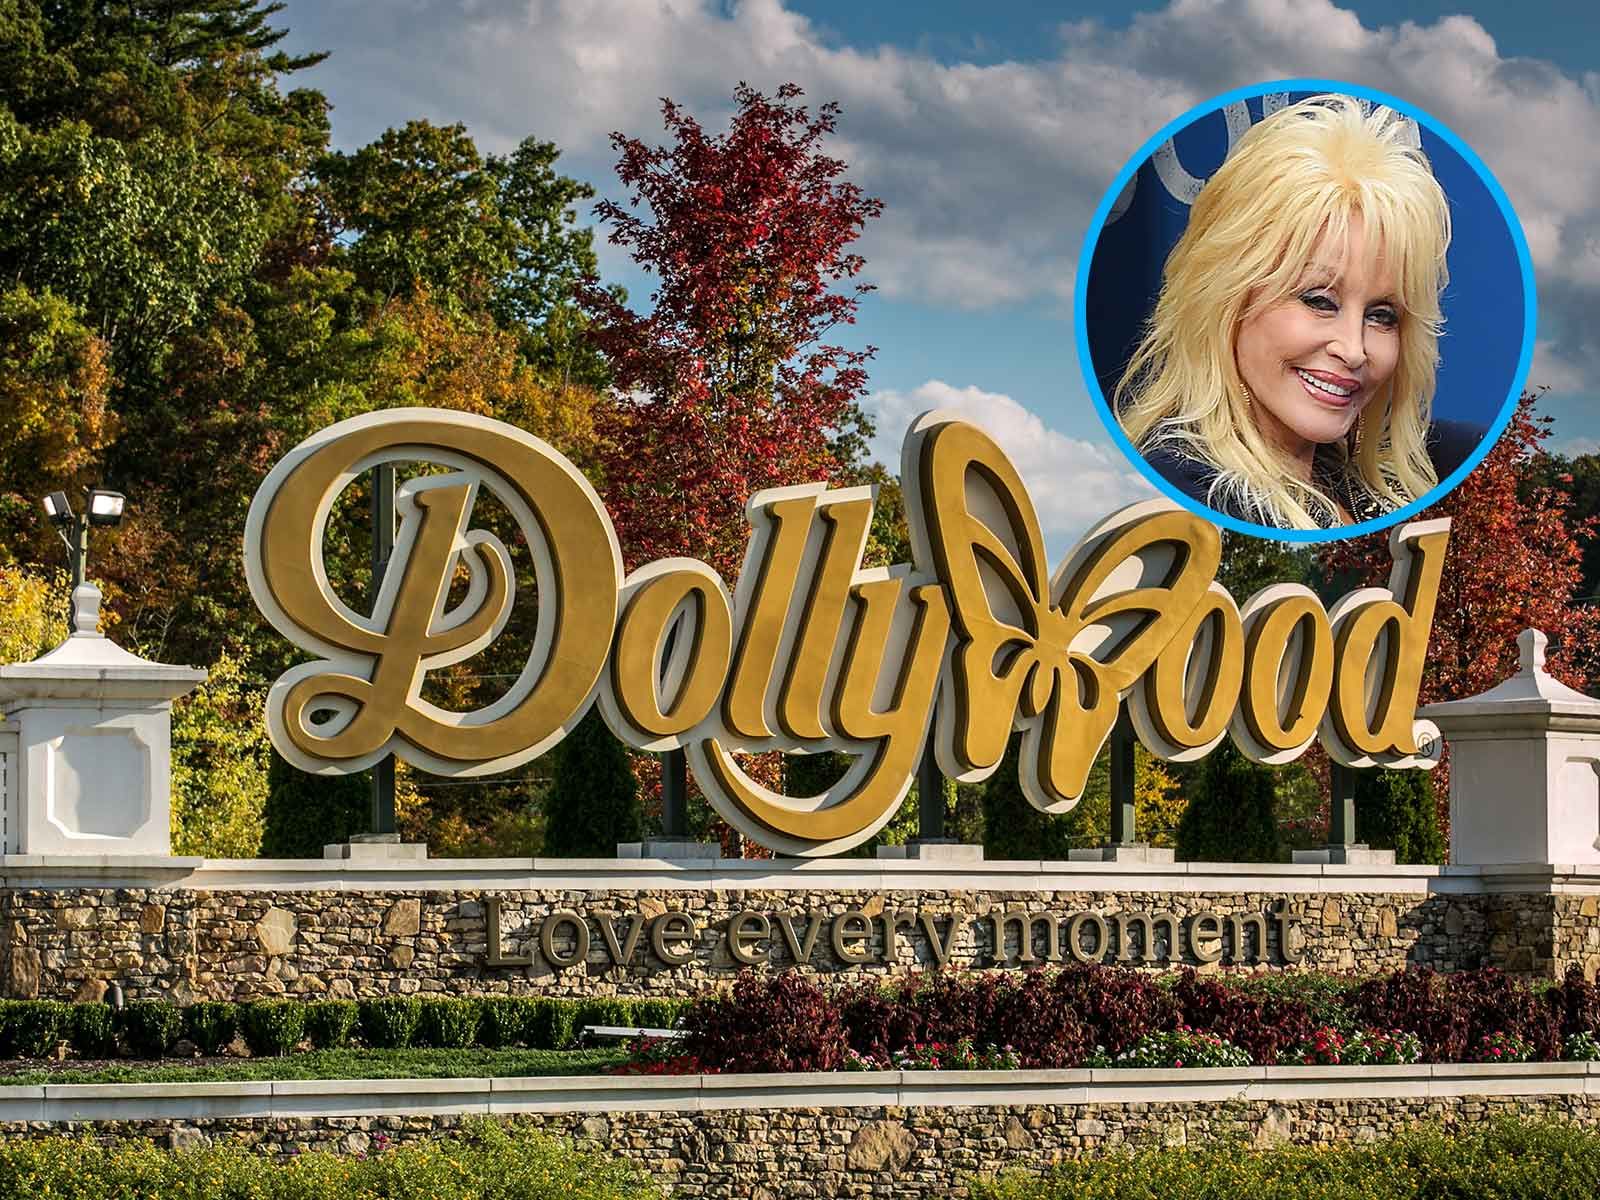 Woman Sues Dollywood for 400,000 Over Theme Park Injury